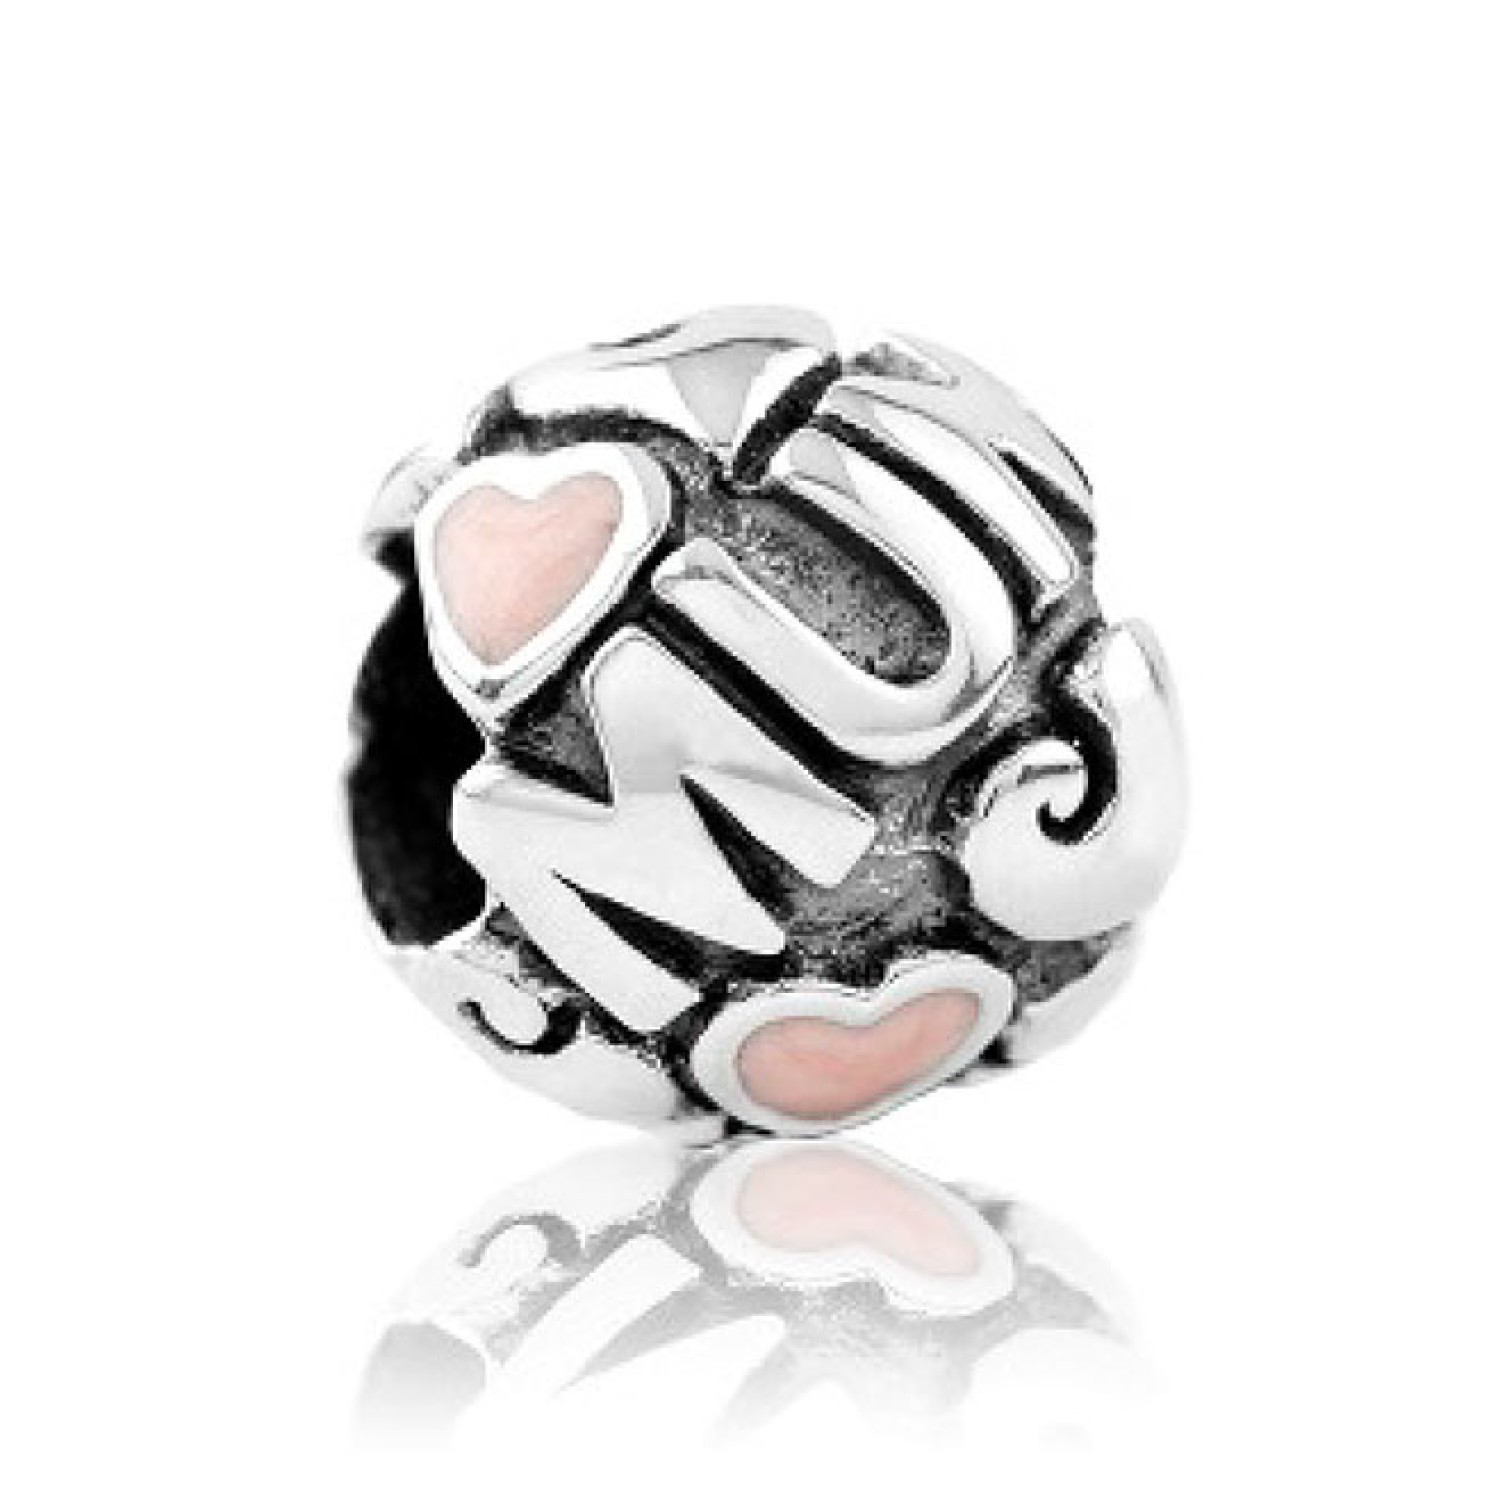 LKE012 Evolve Charm Kiwi Mum. Now Available at Christies Jewellery, this beautiful charm celebrates the unconditional love and support that a mother shares with her precious family. Kiwi Mum” encircles a cluster of Aotearoa’s Hearts and soft pi @christies